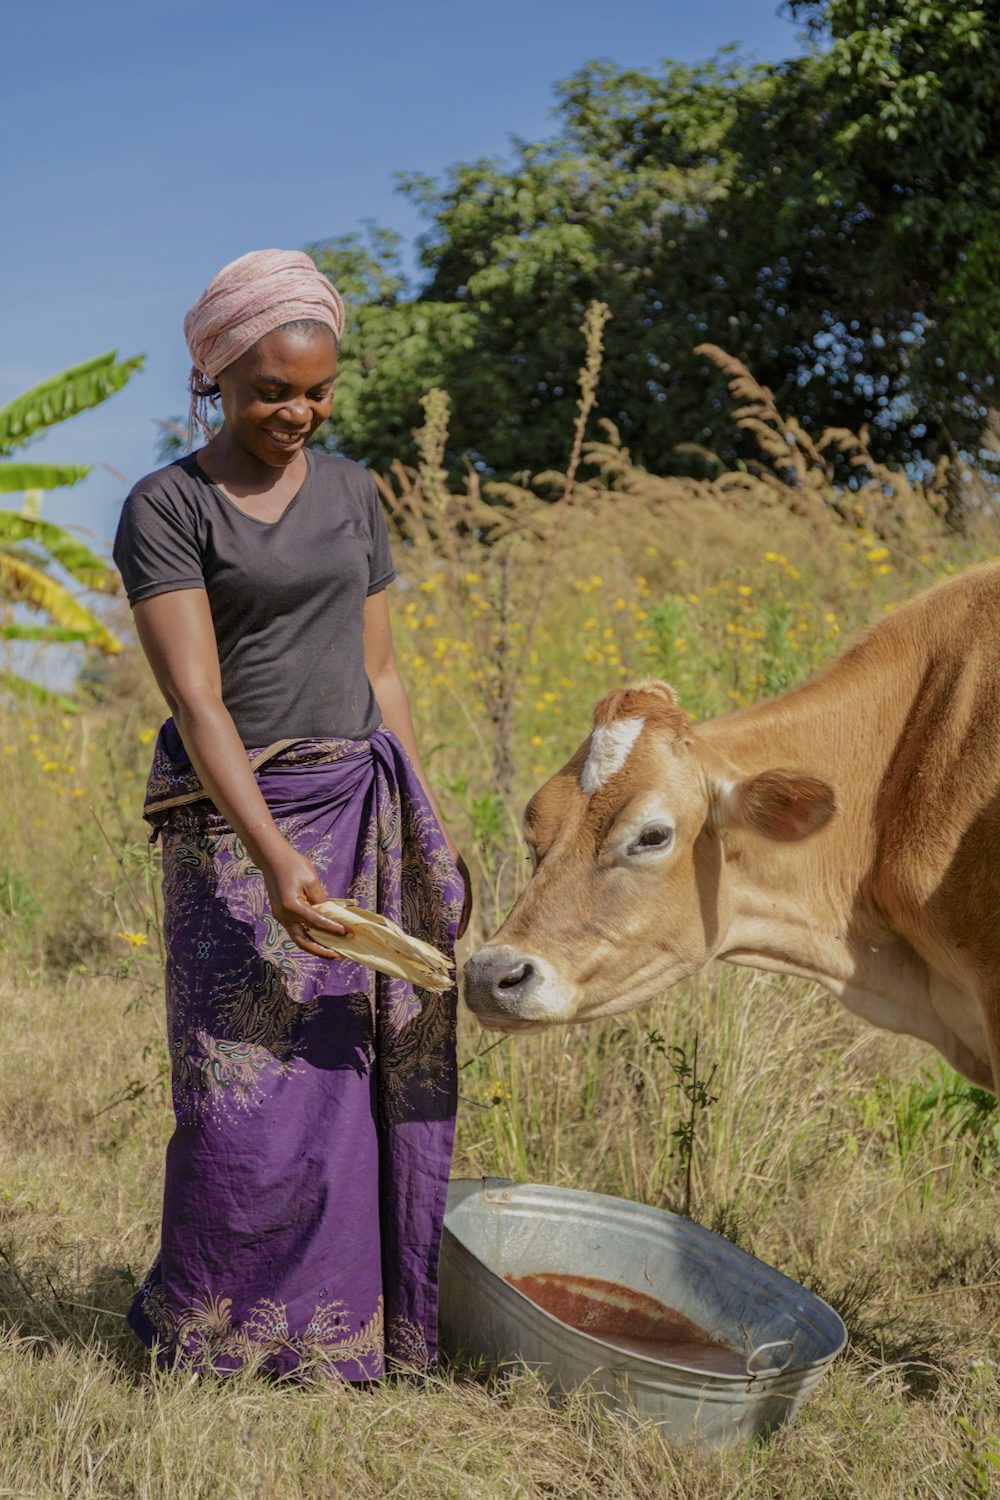 A woman in Zambia feeds her cow.